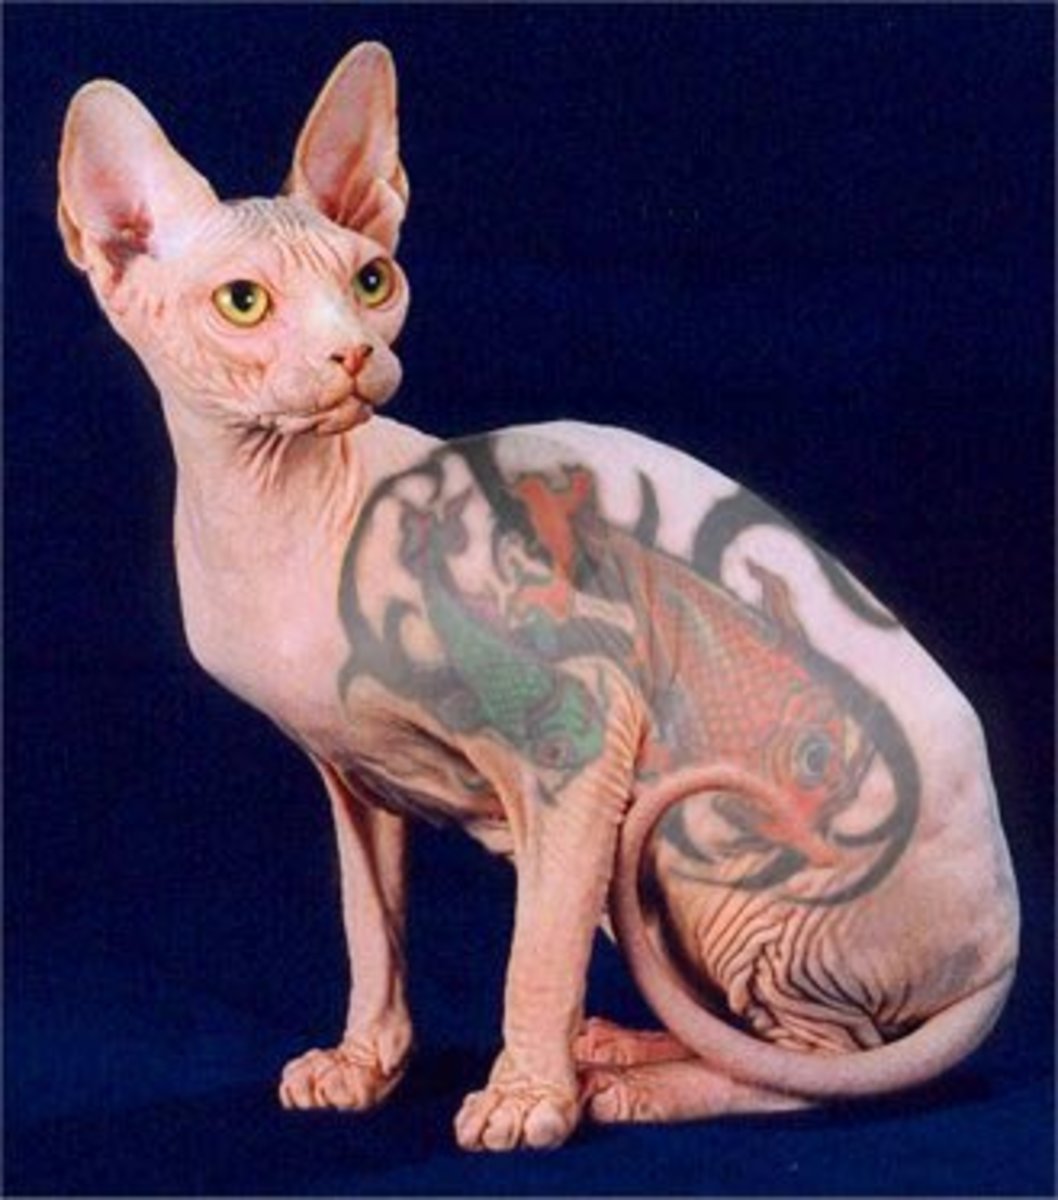 Tattooing  Sphynx (Hairless) Cats Is Cruel